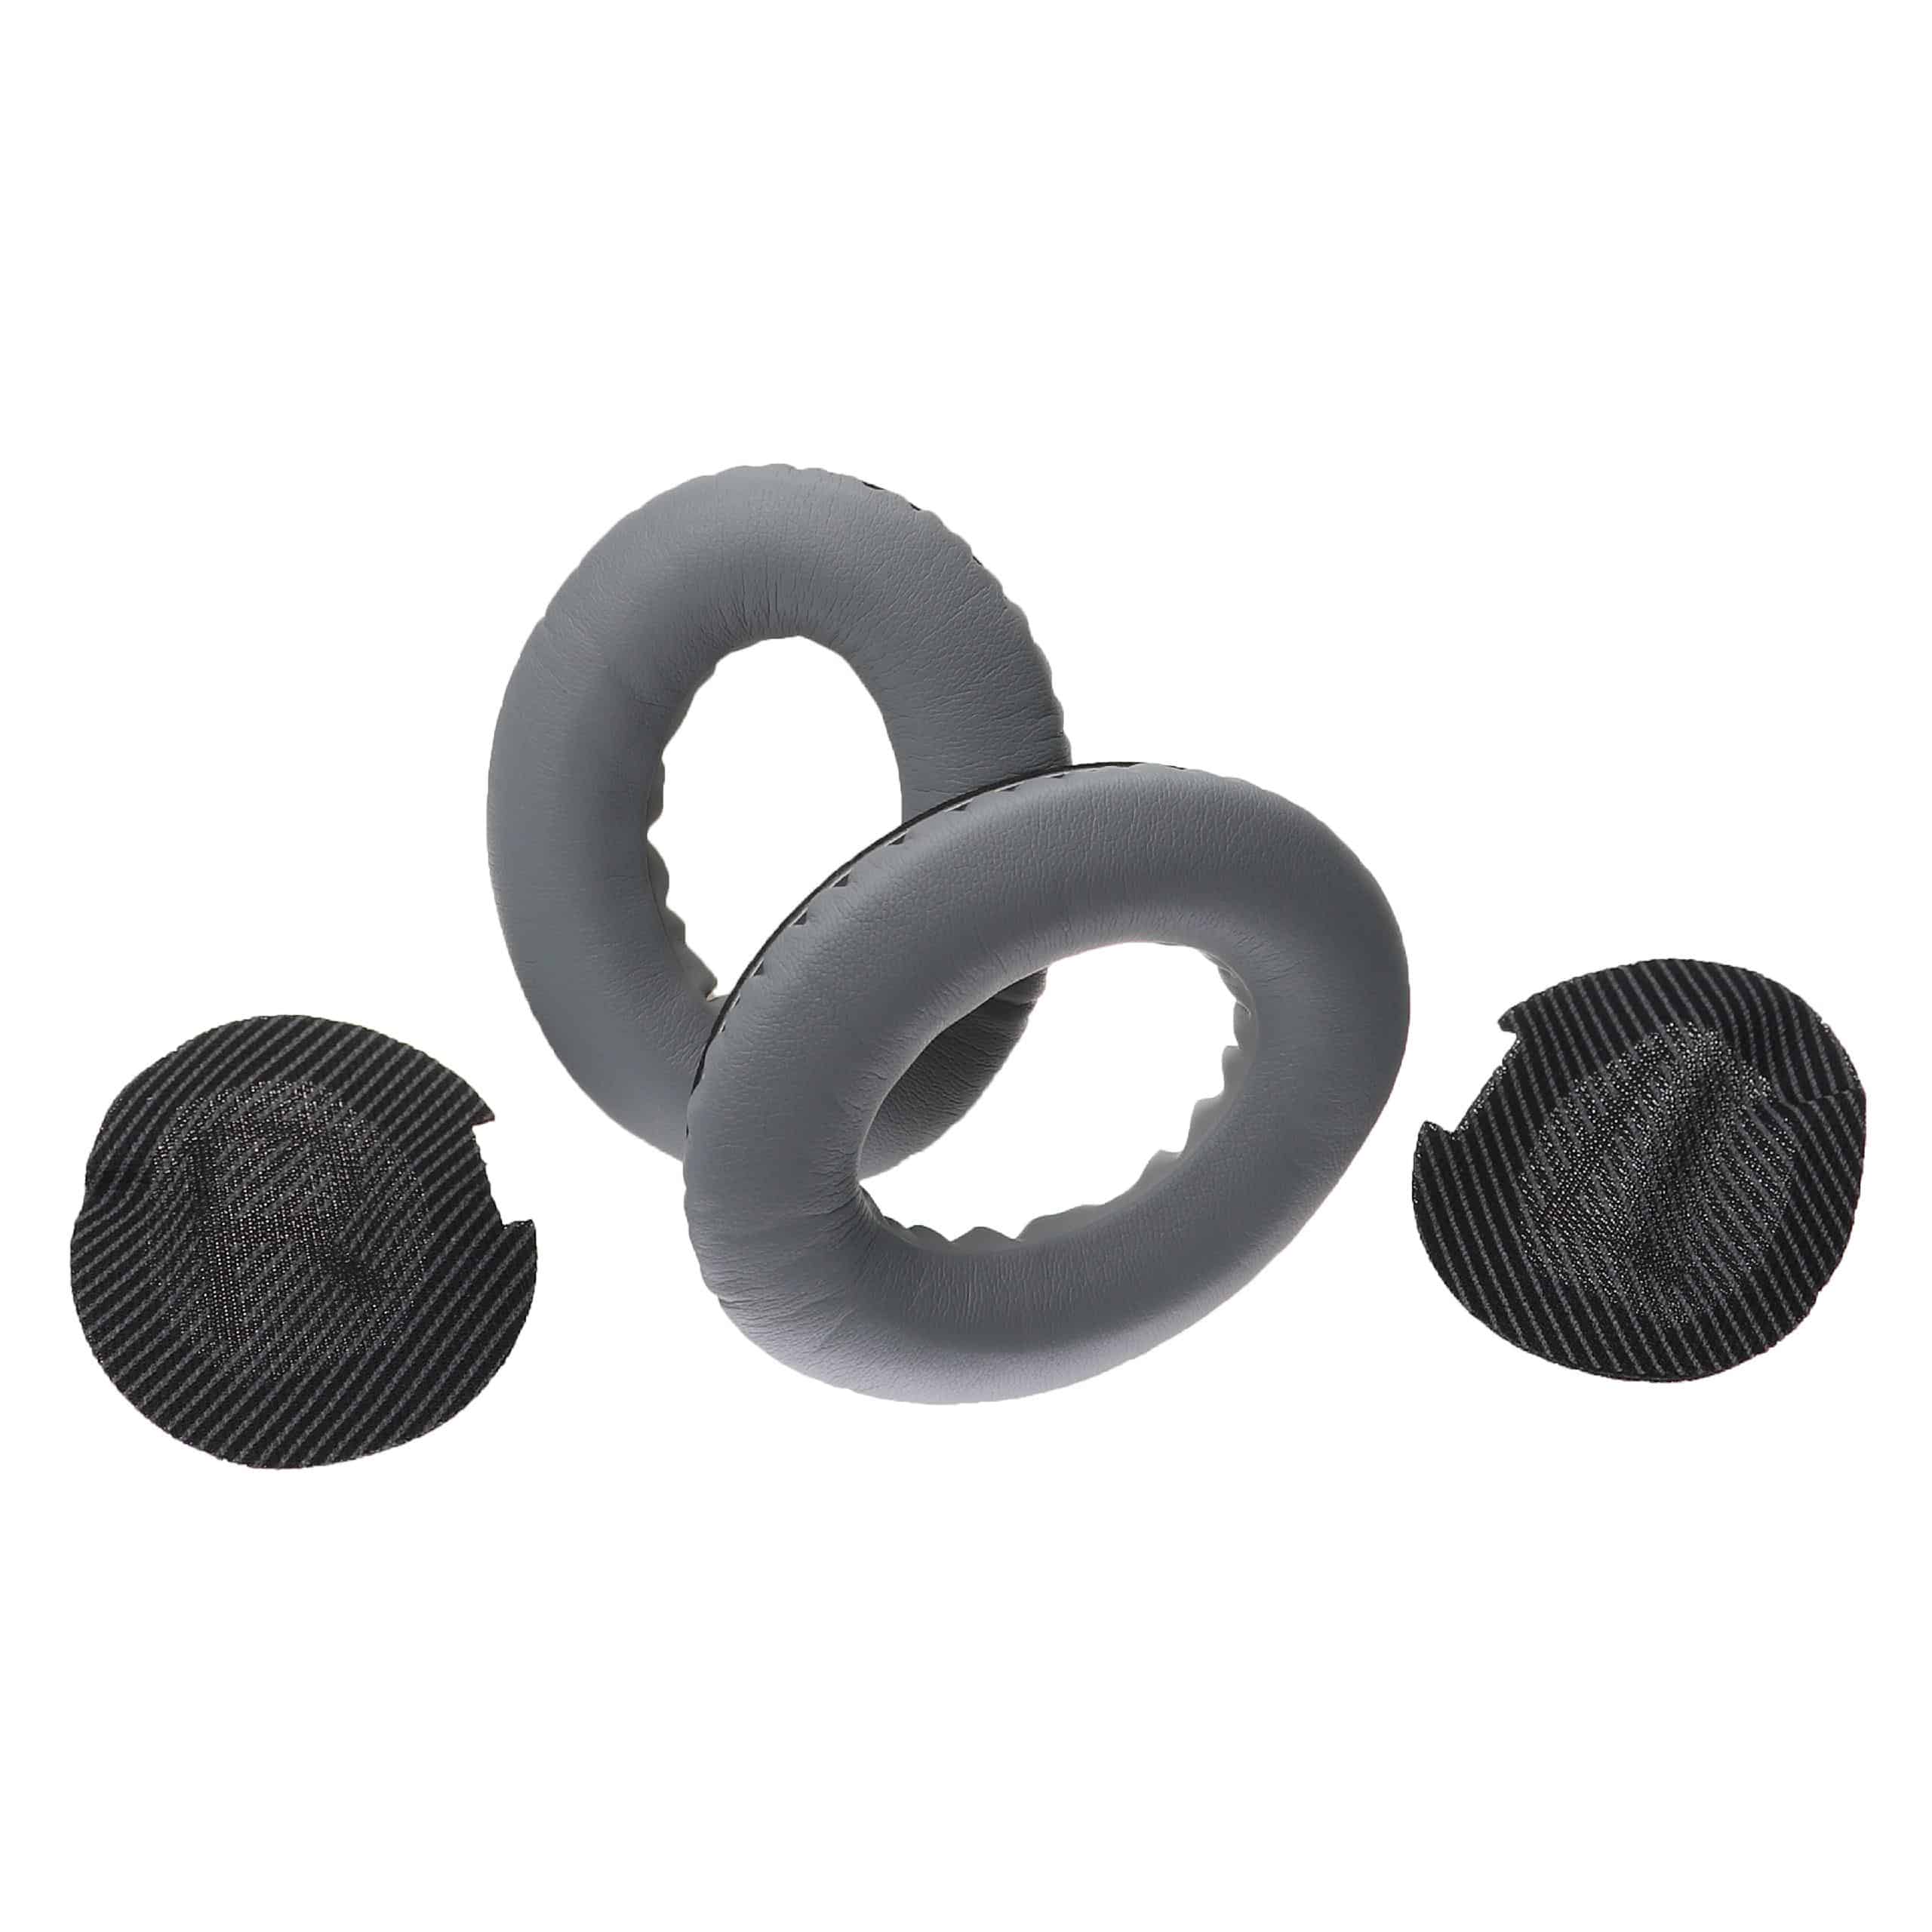 Ear Pads suitable for Bose AE2 Headphones etc. - with Memory Foam, Soft Material, 41 mm thick